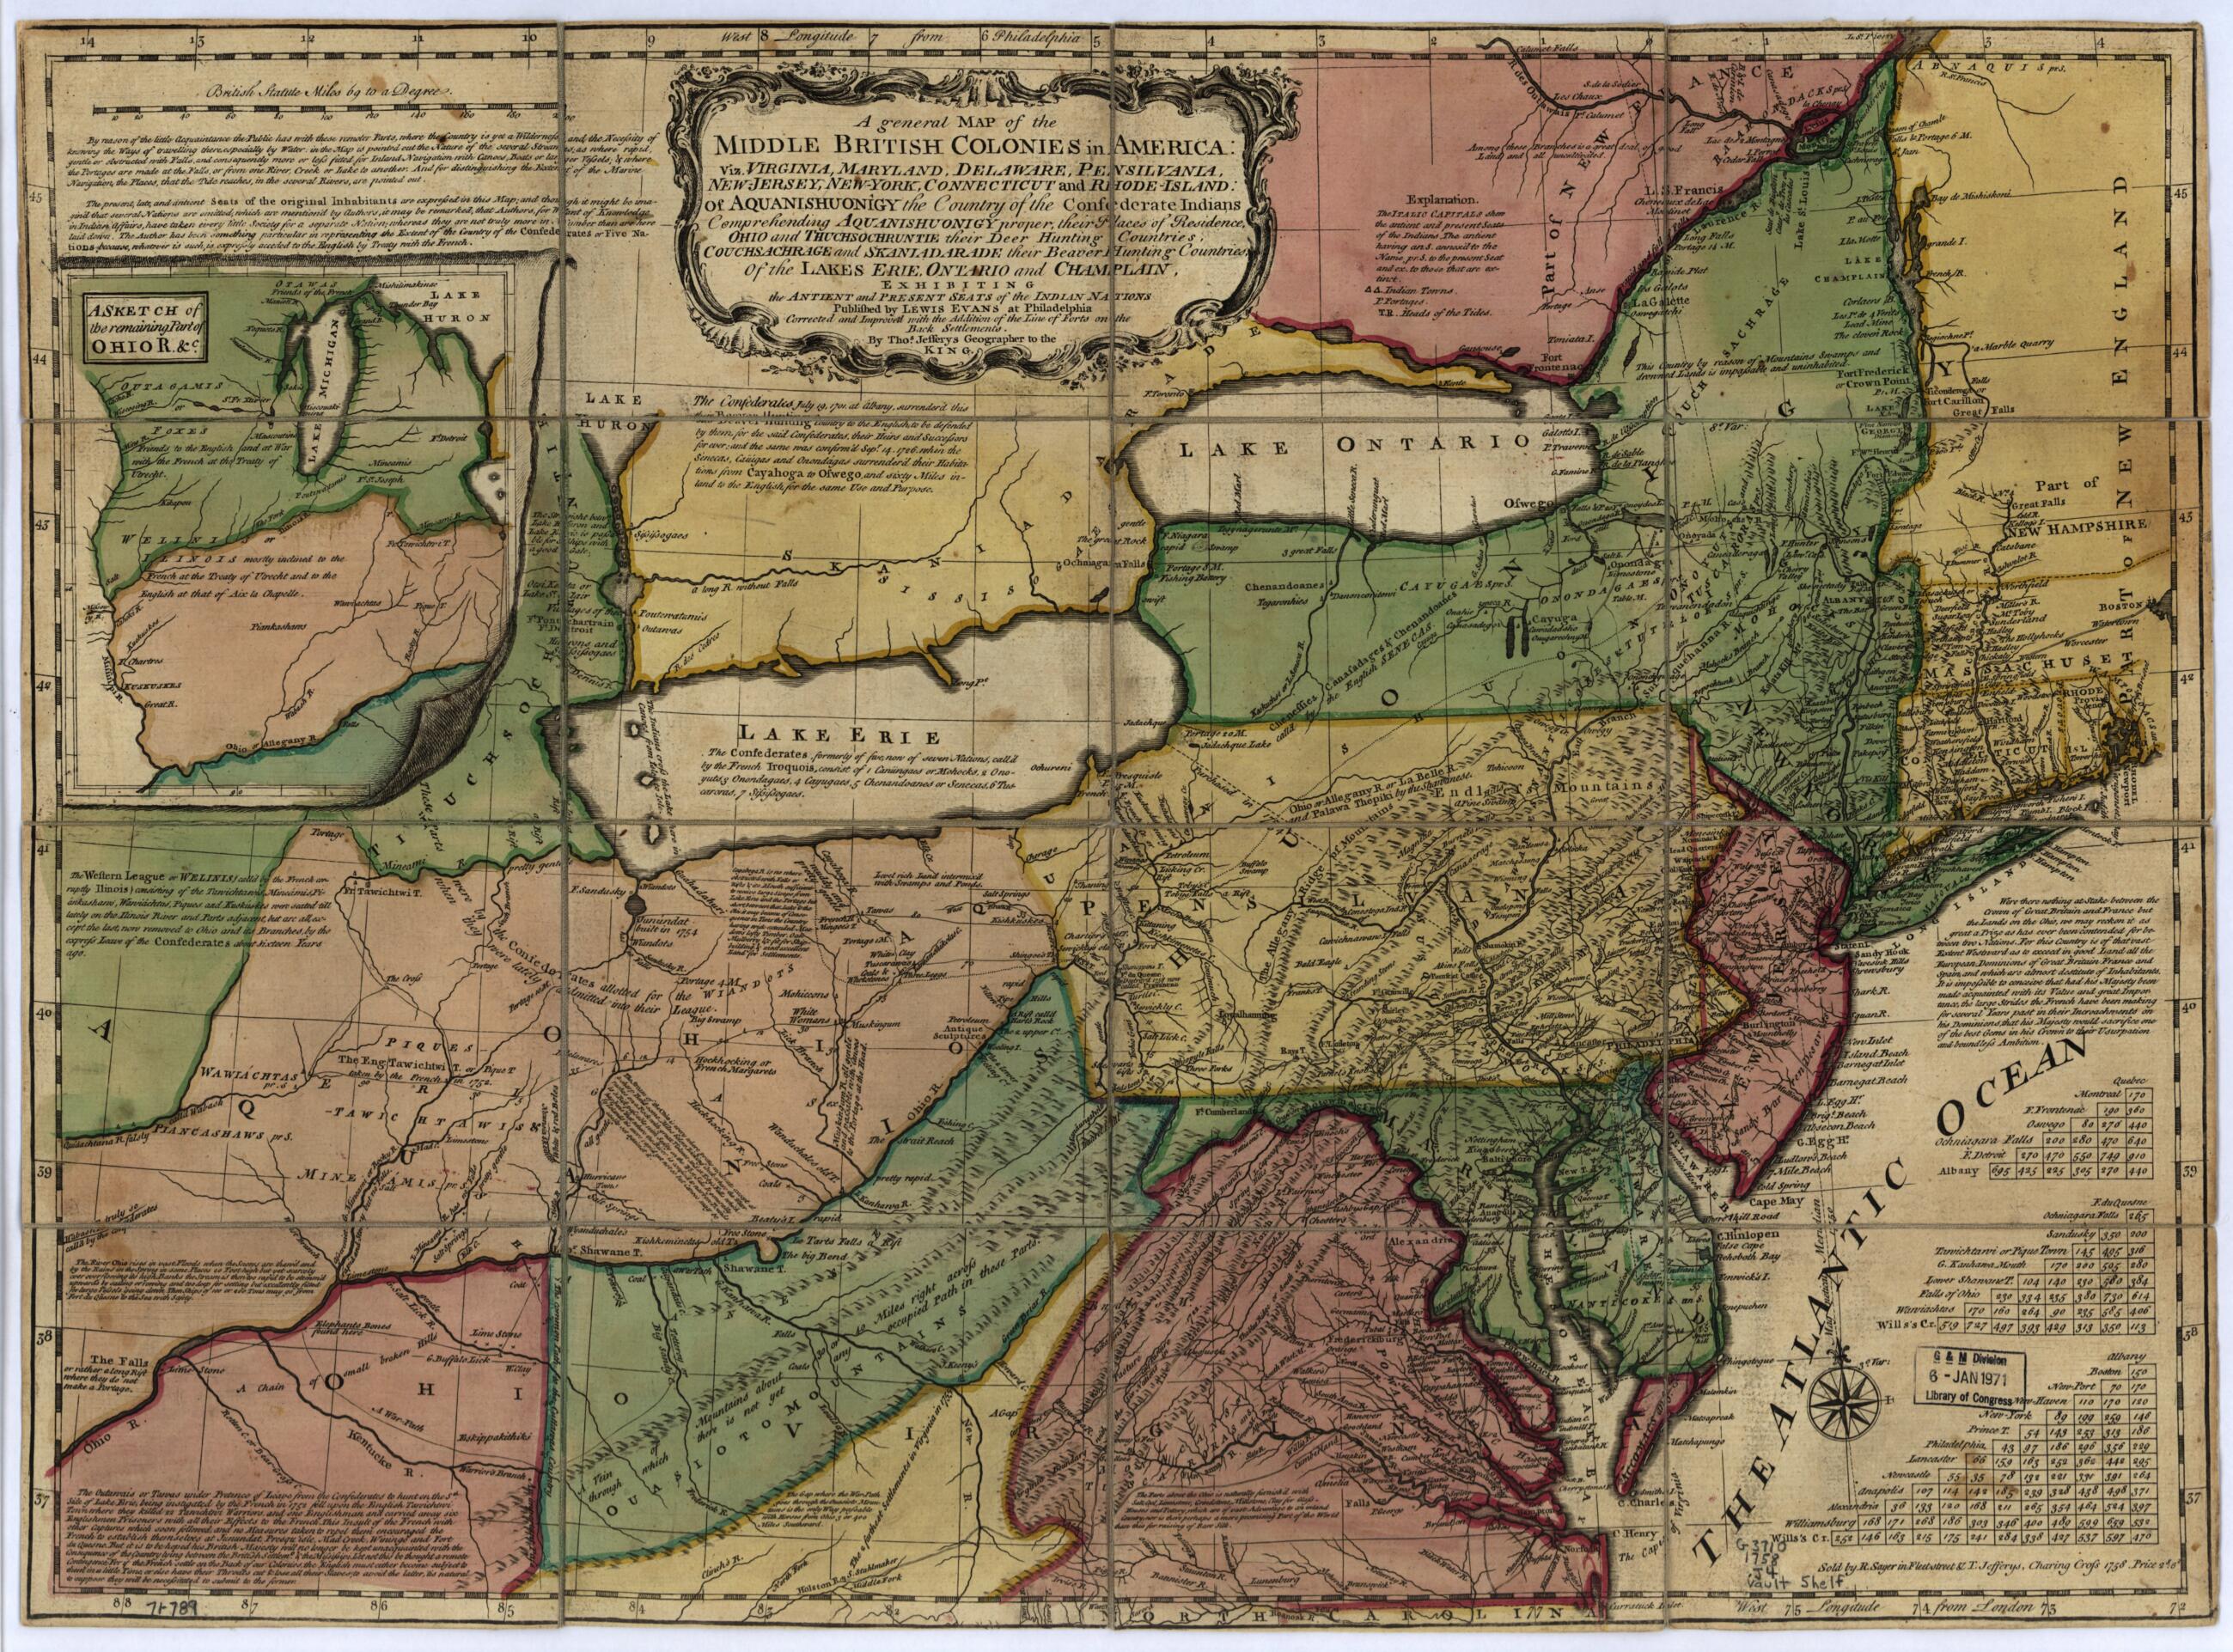 This old map of Jersey, New-York, Connecticut, and Rhode-Island: of Aquanishuonîgy the Country of the Confederate Indians Comprehending Aquanishuonigy Proper, Their Places of Residence, Ohio and Tuchsochruntie Their Deer Hunting Countries, Couchsachrage